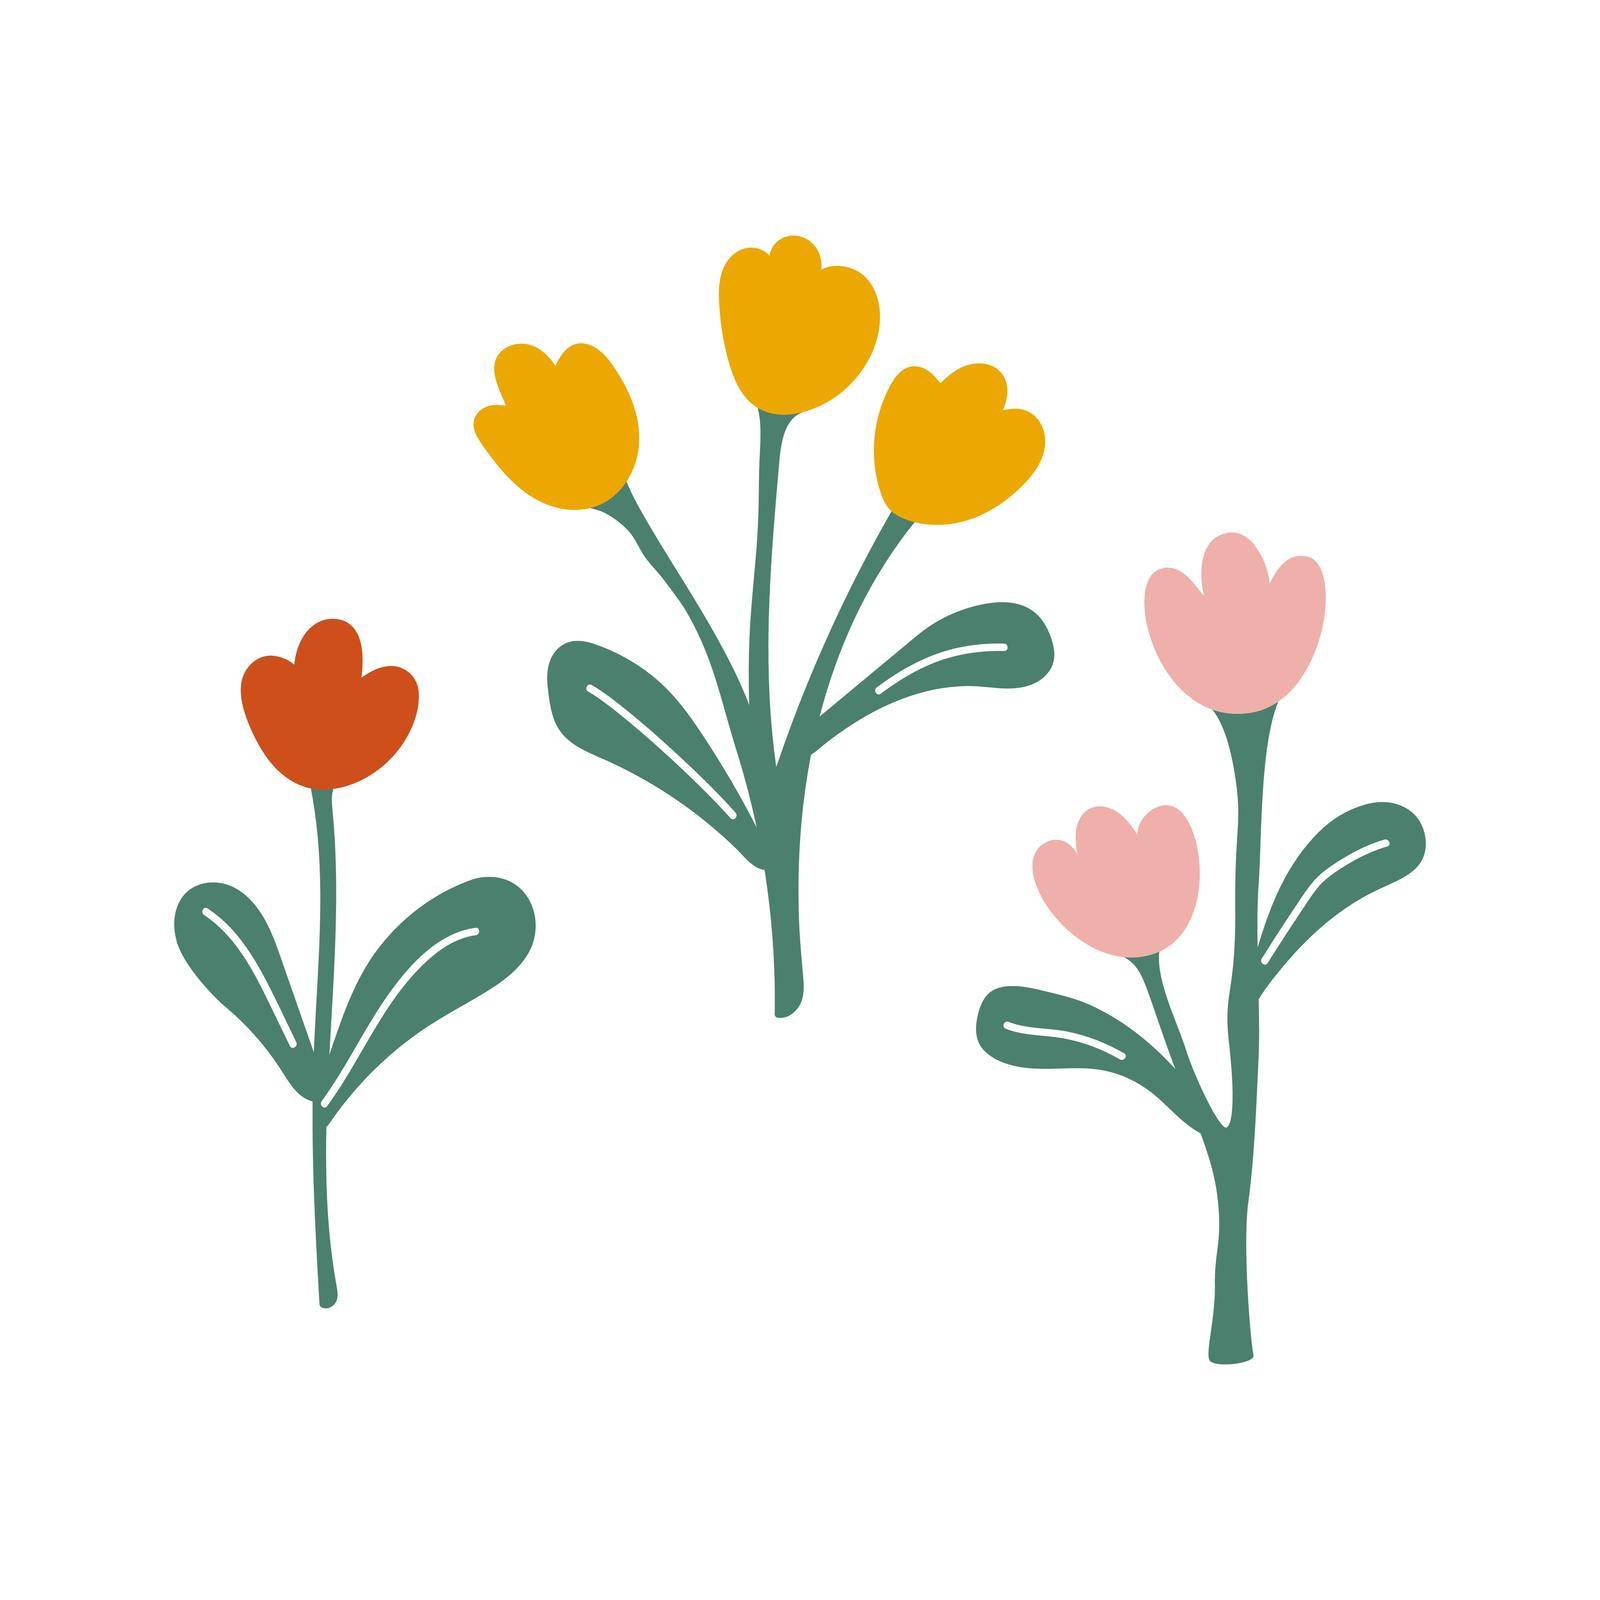 Playful isolated colored spring tulips by lera_feeva